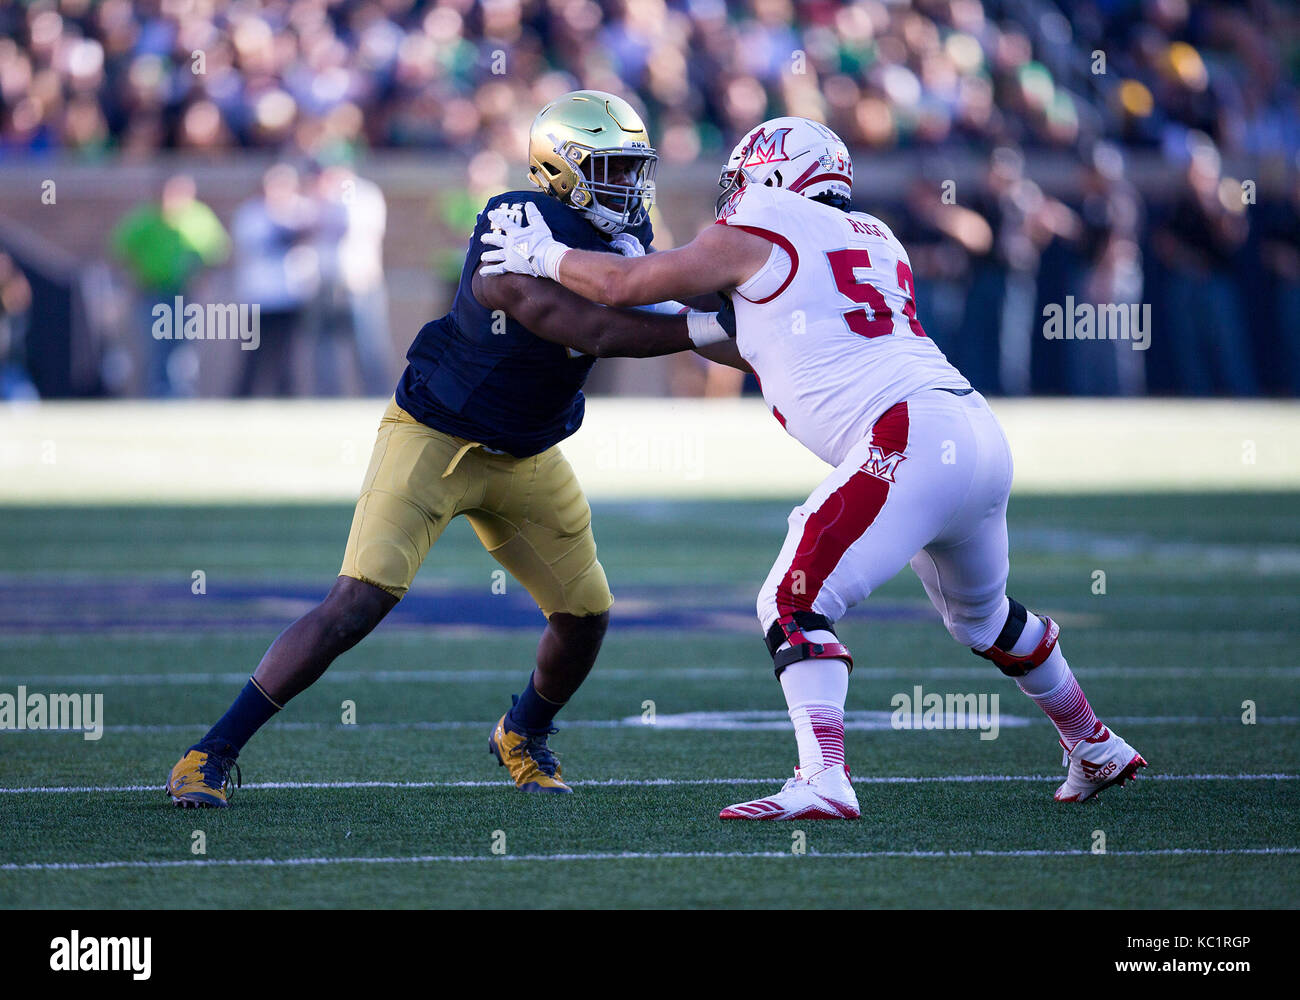 South Bend, Indiana, USA. 30th Sep, 2017. Notre Dame defensive lineman Jay Hayes (93) and Miami-Ohio offensive line Jordan Rigg (52) battle at the line of scrimmage during NCAA football game action between the Miami-Ohio RedHawks and the Notre Dame Fighting Irish at Notre Dame Stadium in South Bend, Indiana. Notre Dame defeated Miami-Ohio 52-17. John Mersits/CSM/Alamy Live News Stock Photo